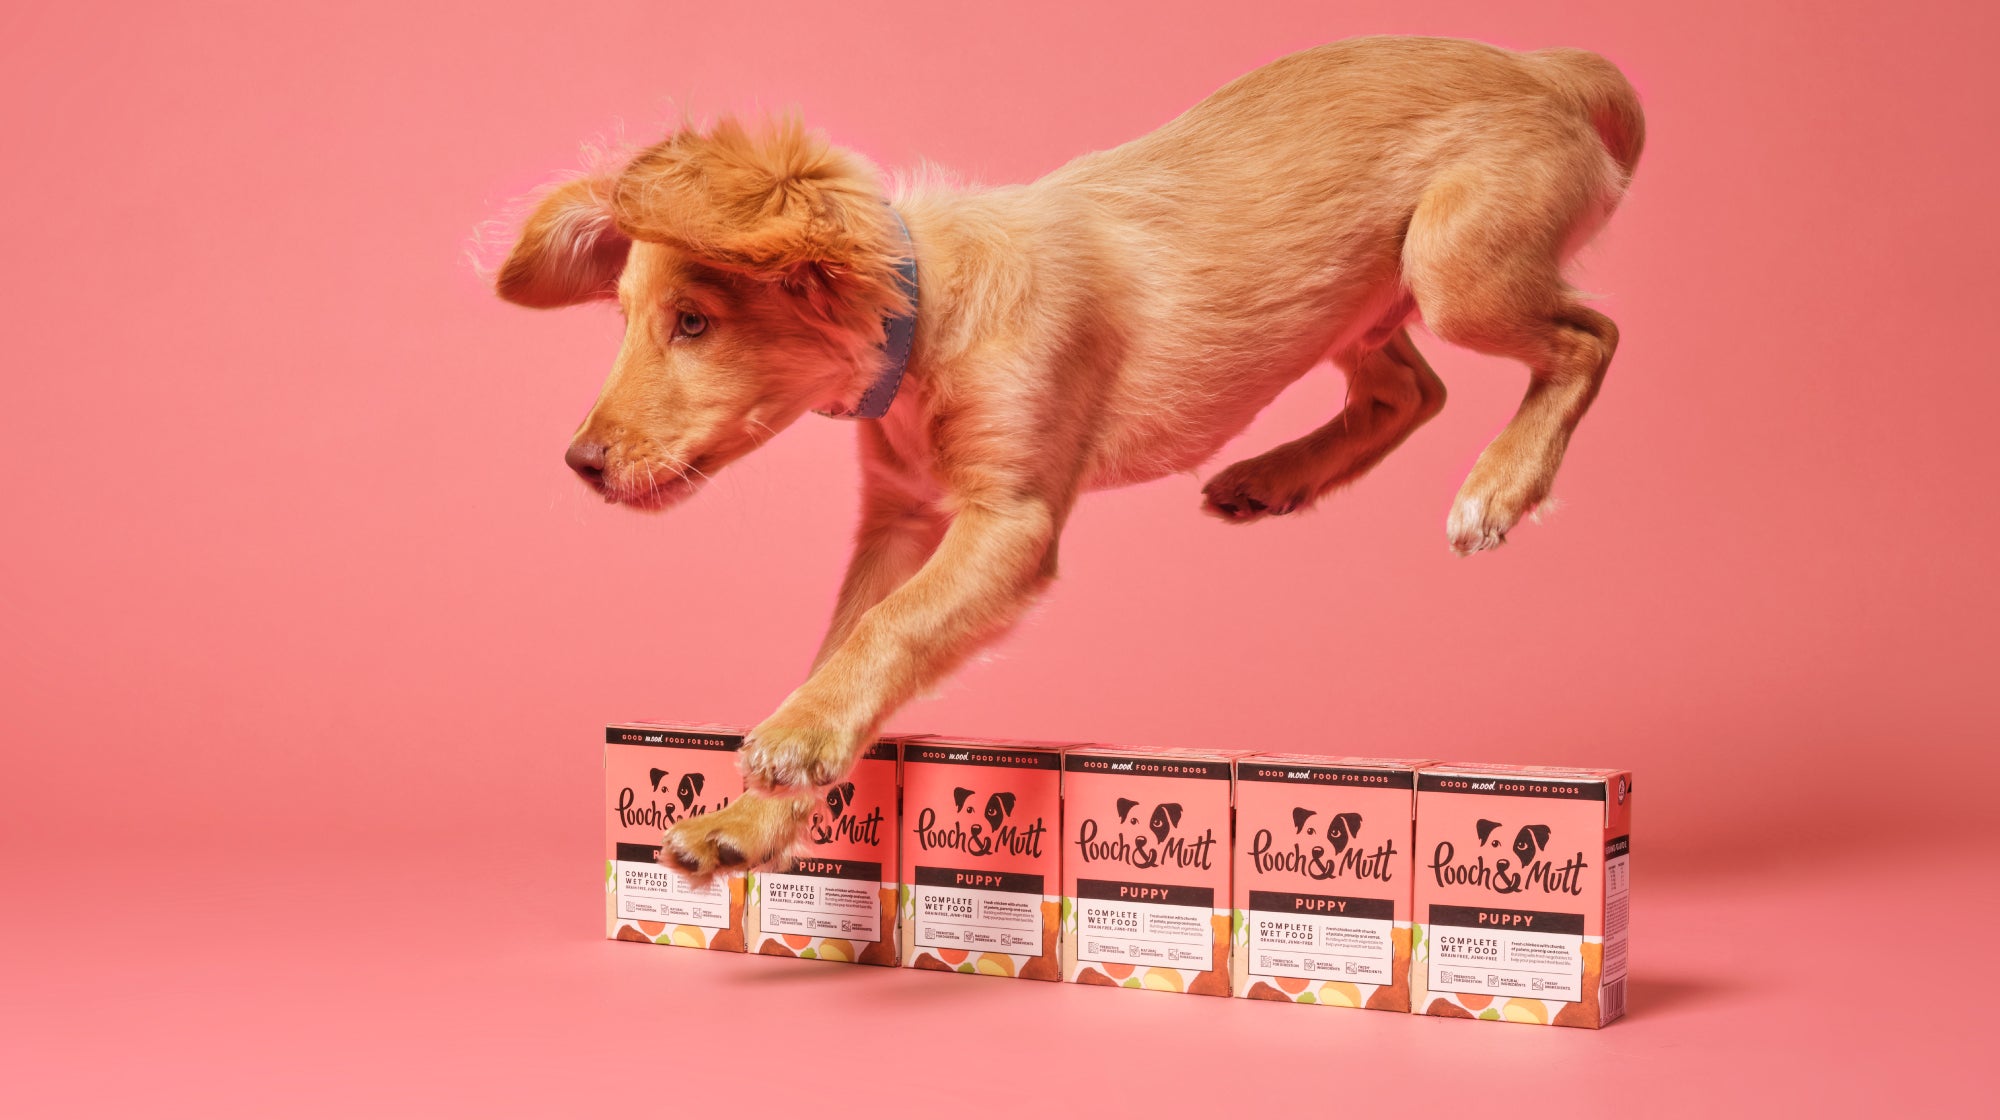 puppy jumping over a line of dog food cartons